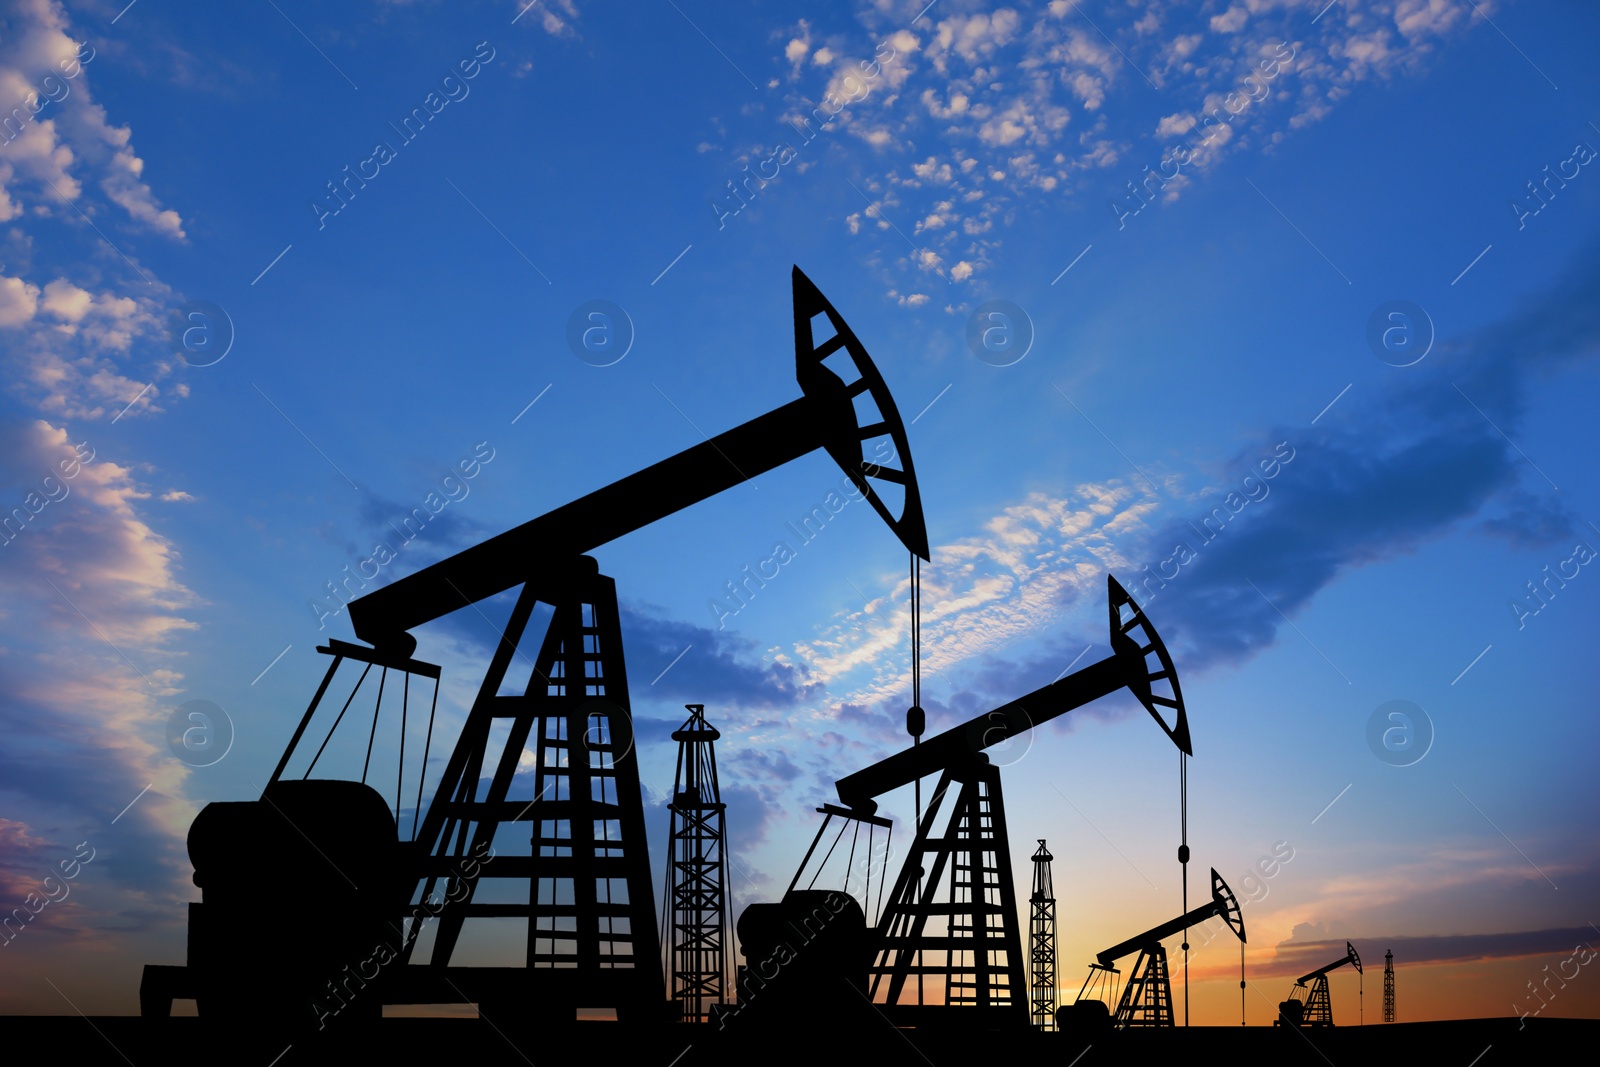 Image of Silhouettes of crude oil pumps at sunset